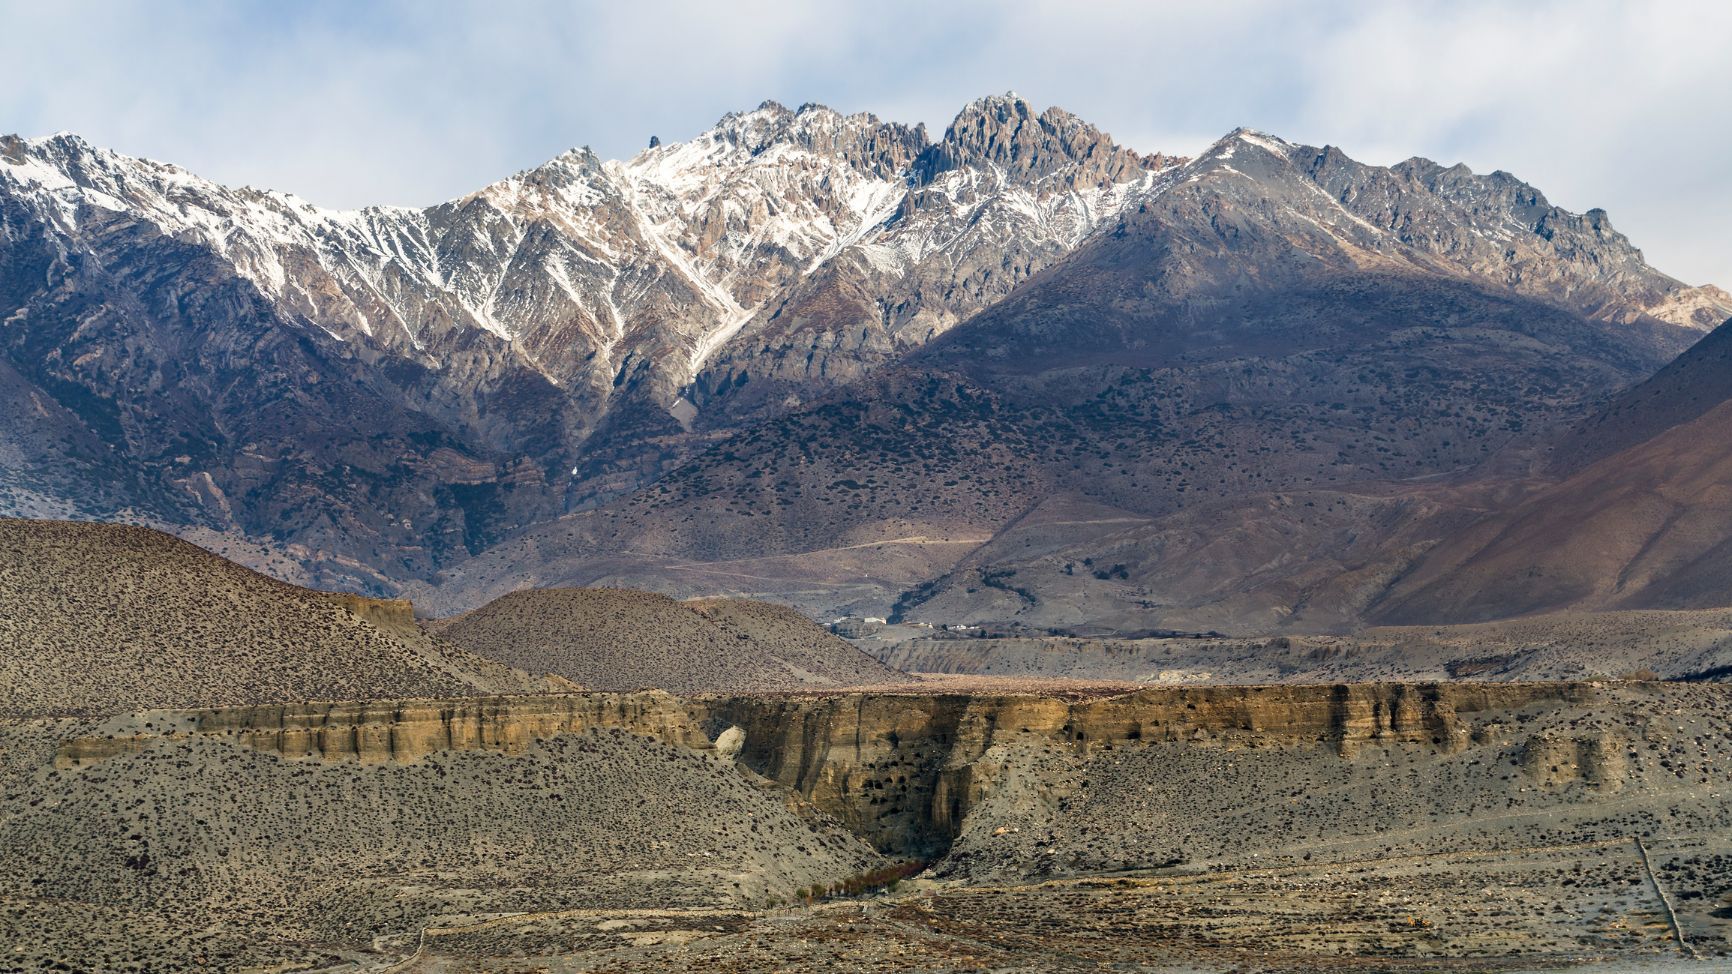 The rocky landscape on the Annapurna Circuit trail from Kagbeni to Jomsom in Nepal. Photo: Getty